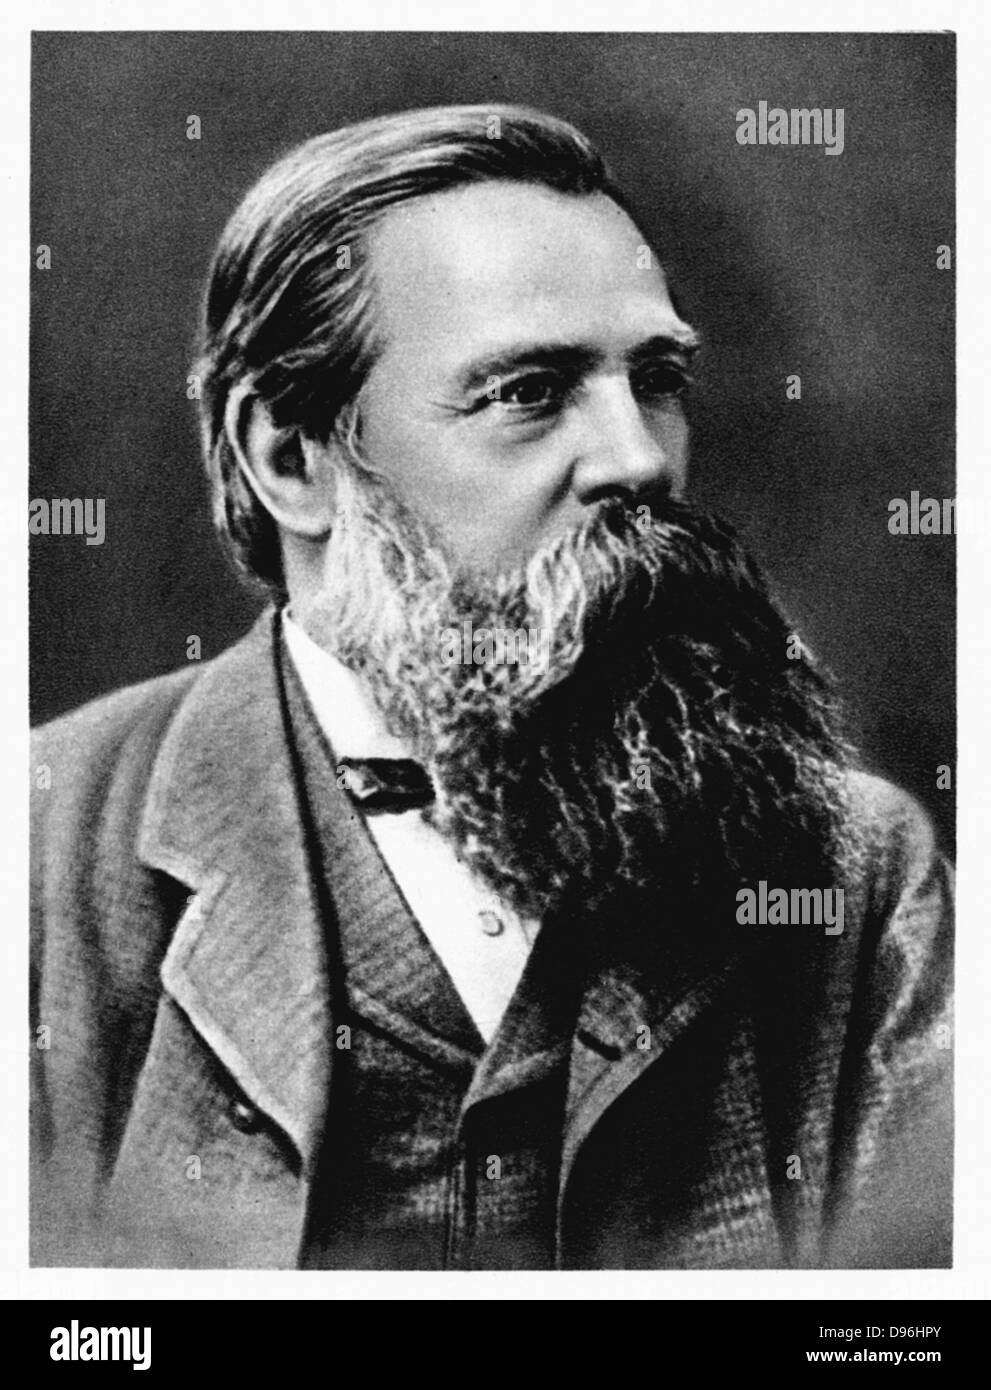 Friedrich Engels (1820-95) in 1879. German socialist and collaborator and supporter of Karl Marx. Lived mainly in England from 1842.  Cooperated on the Communist Manifesto (1848). Stock Photo